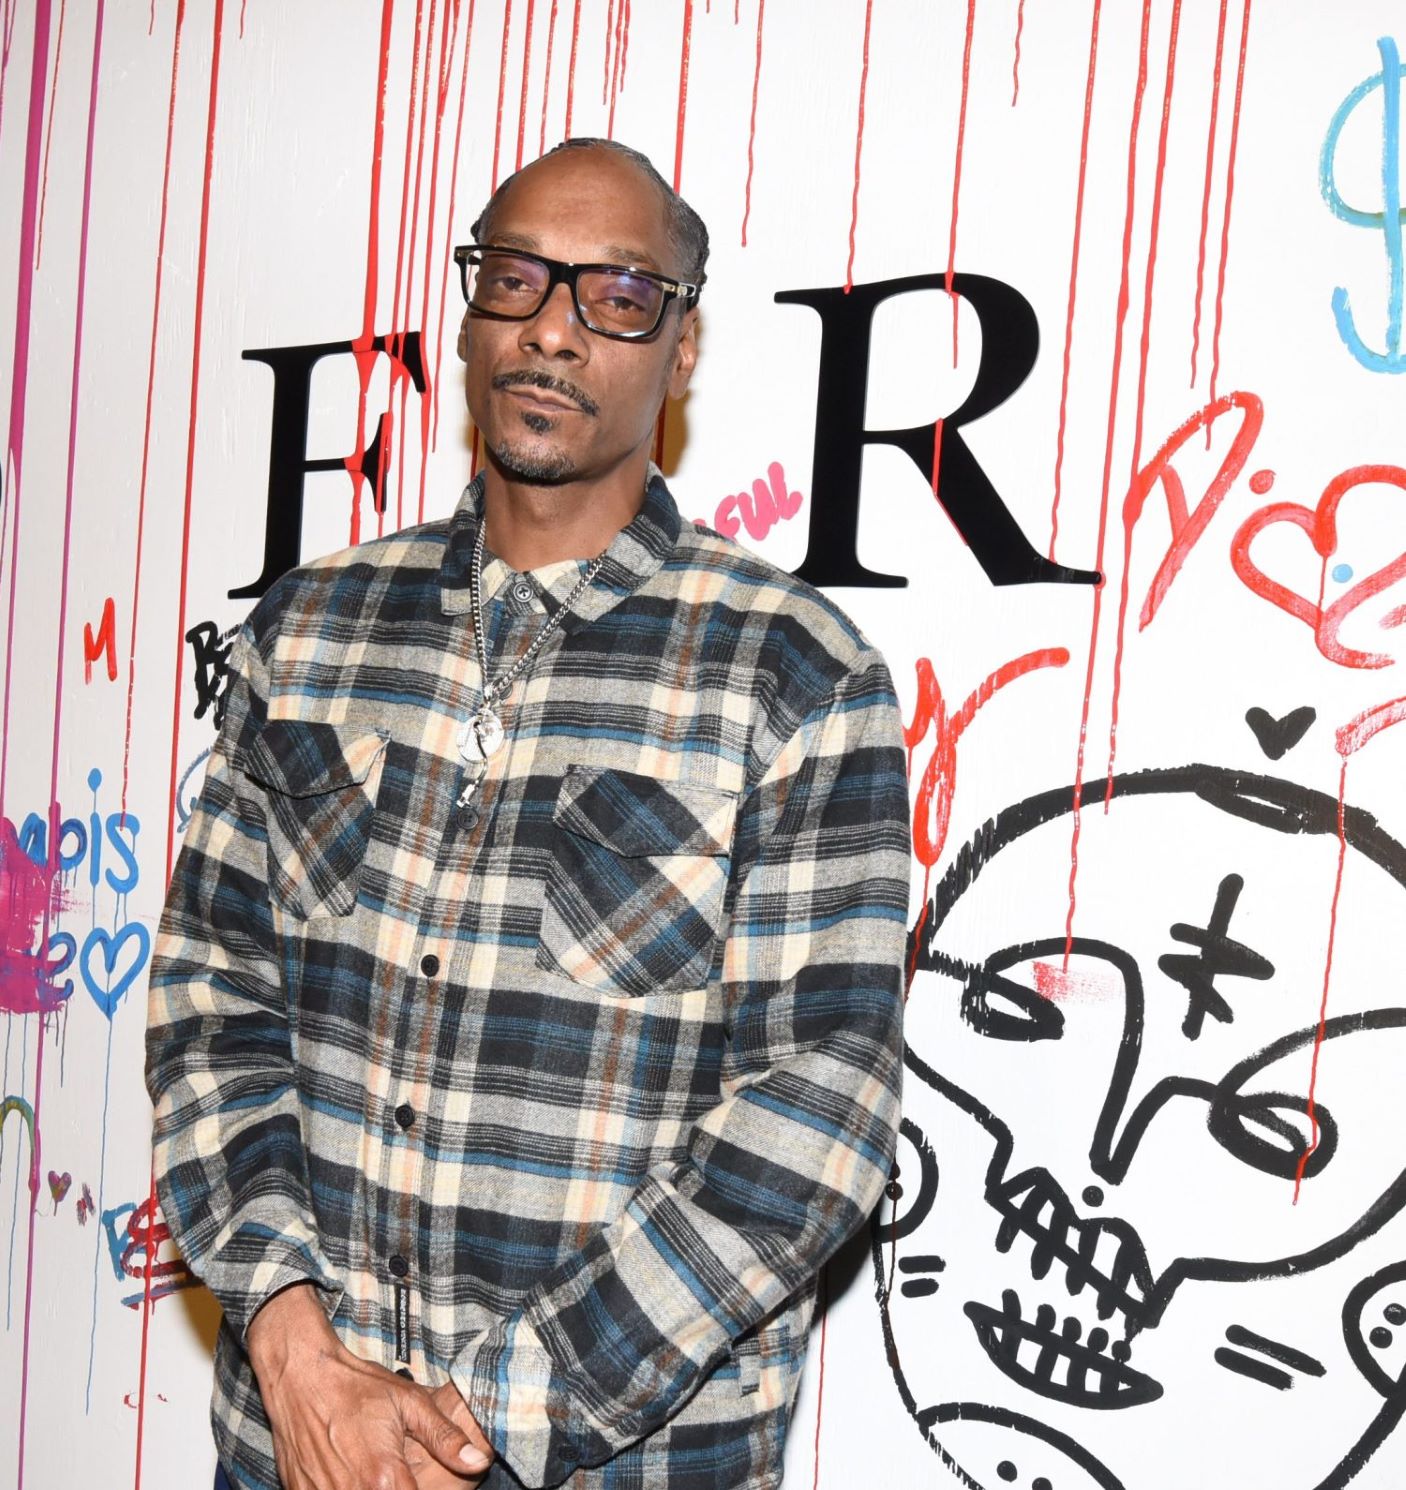 Uber Eats Driver Considering Pursuing Legal Action Against Snoop Dogg For Posting Personal Information On Instagram